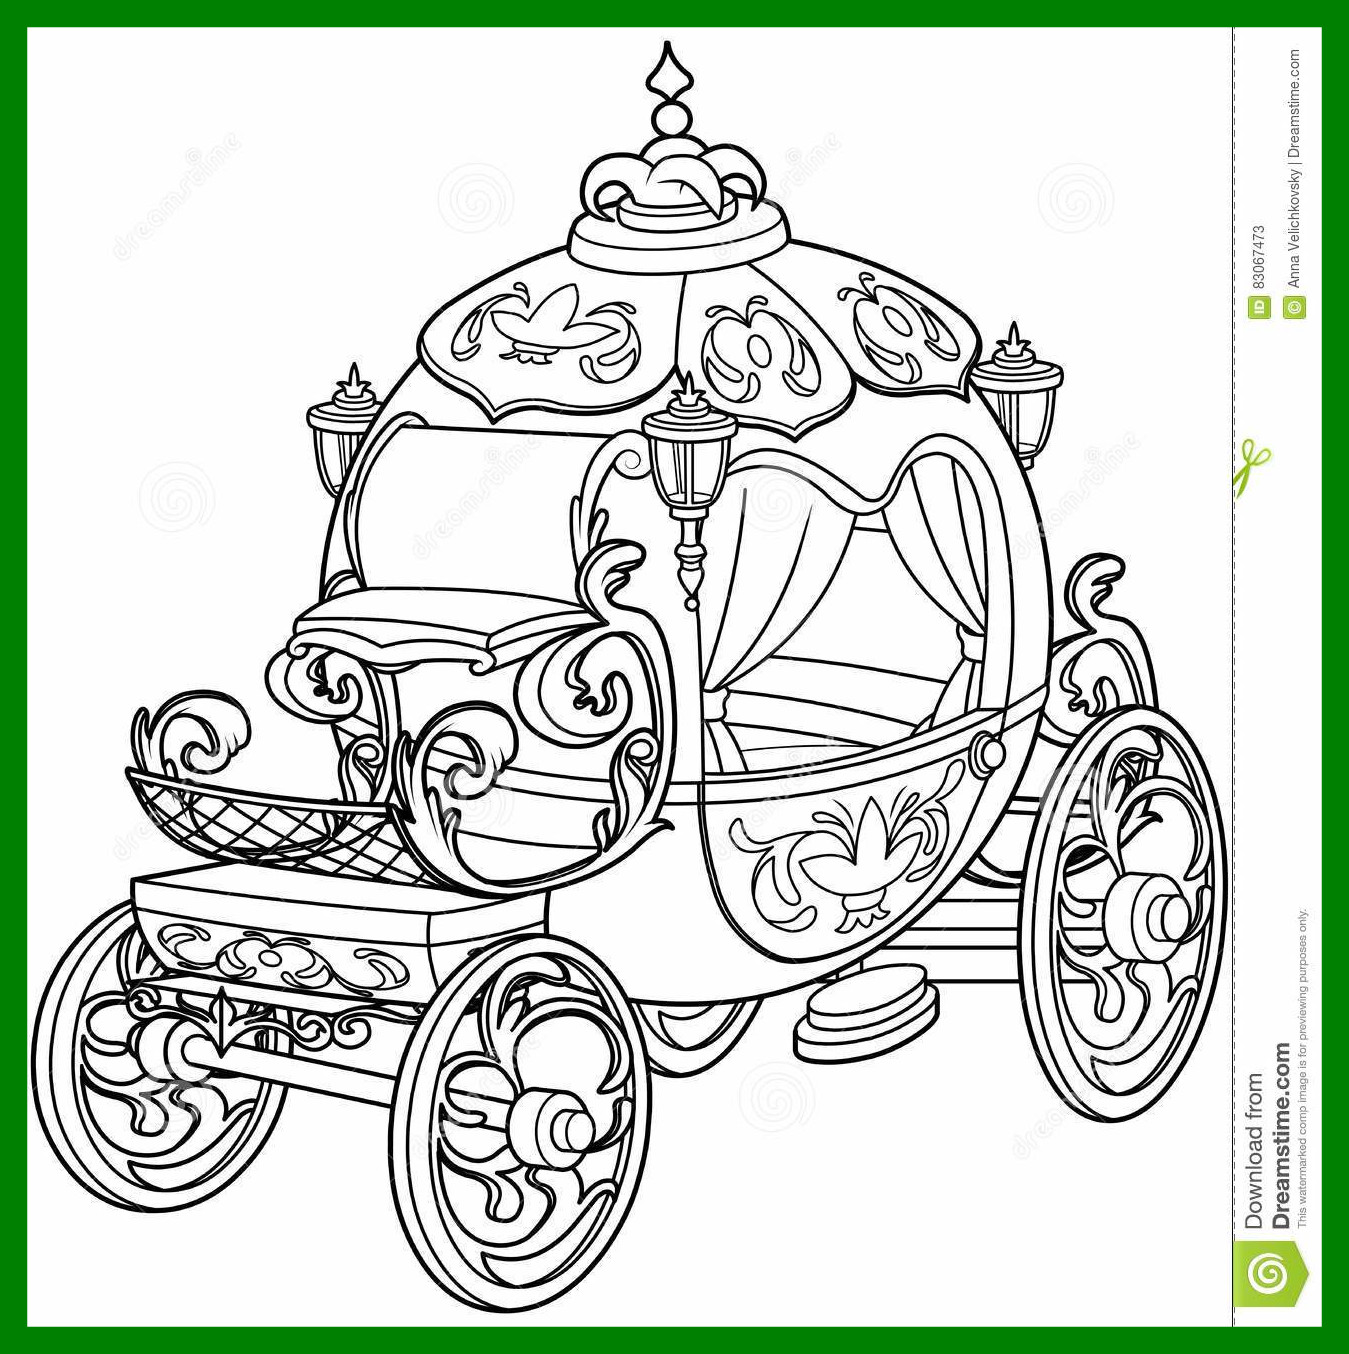 Horse And Carriage Coloring Pages at GetColorings.com | Free printable